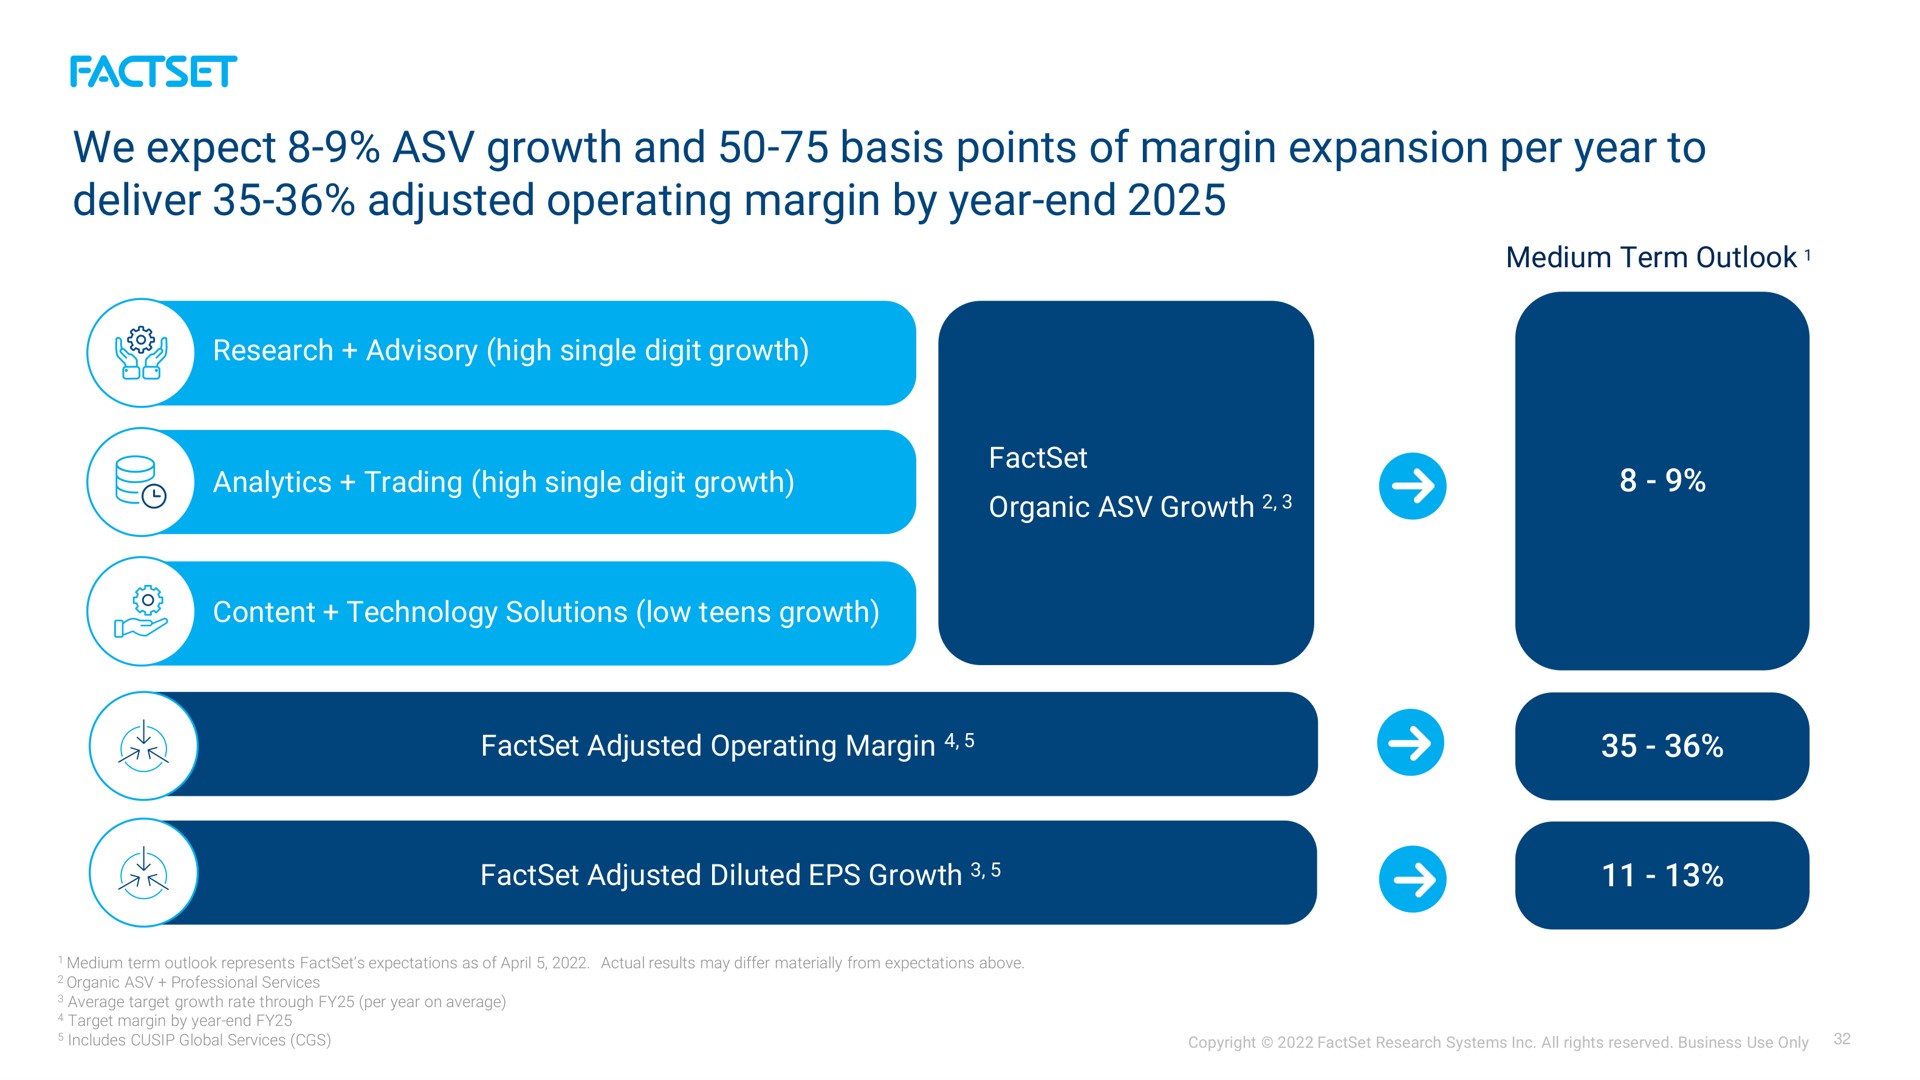 we expect growth and basis points of margin expansion per year to deliver adjusted operating margin by year end | Factset